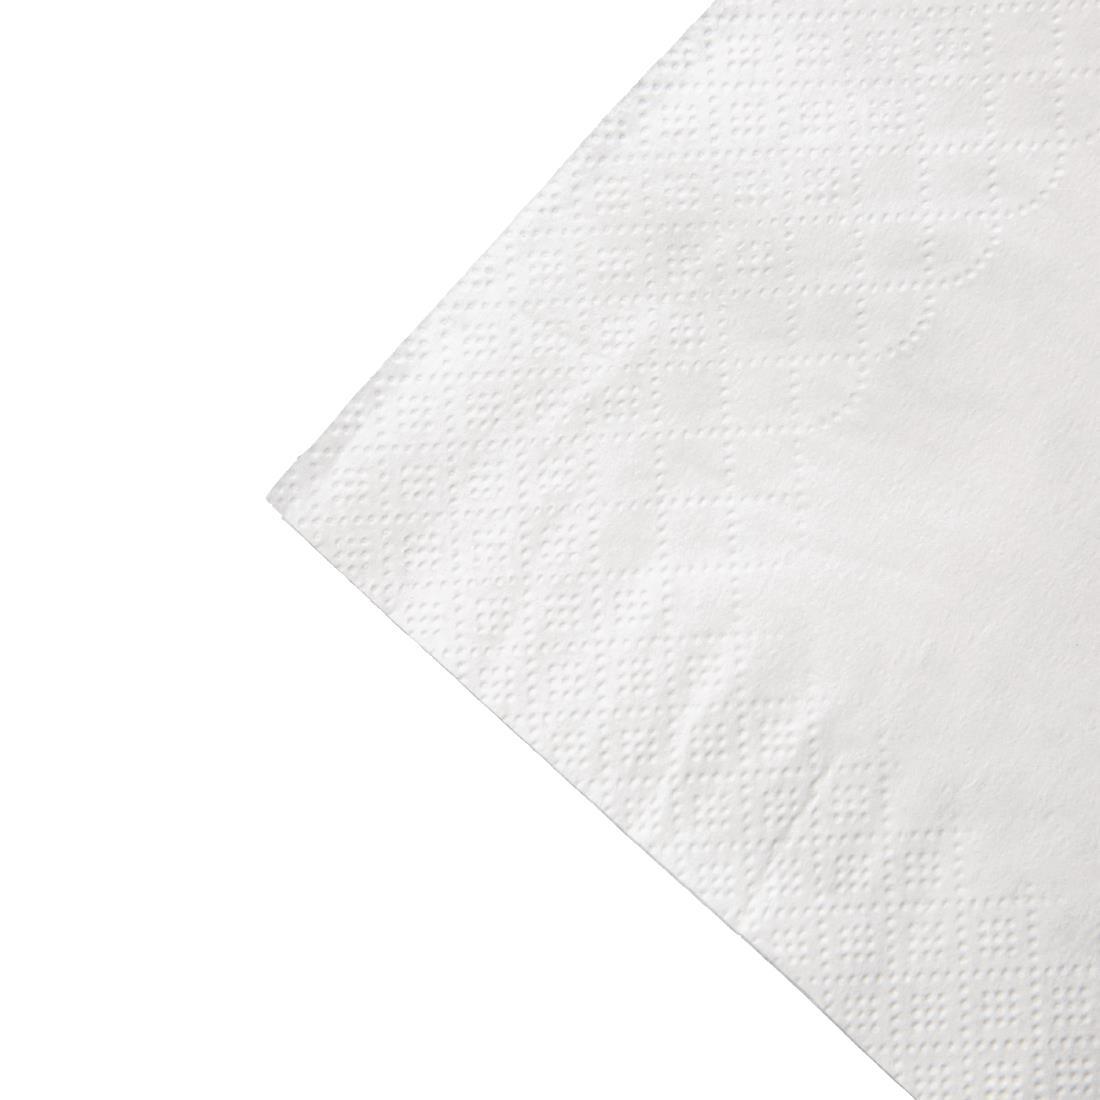 Fiesta Recyclable Lunch Napkin White 30x30cm 2ply 1/4 Fold (Pack of 2000) - CM562  - 5